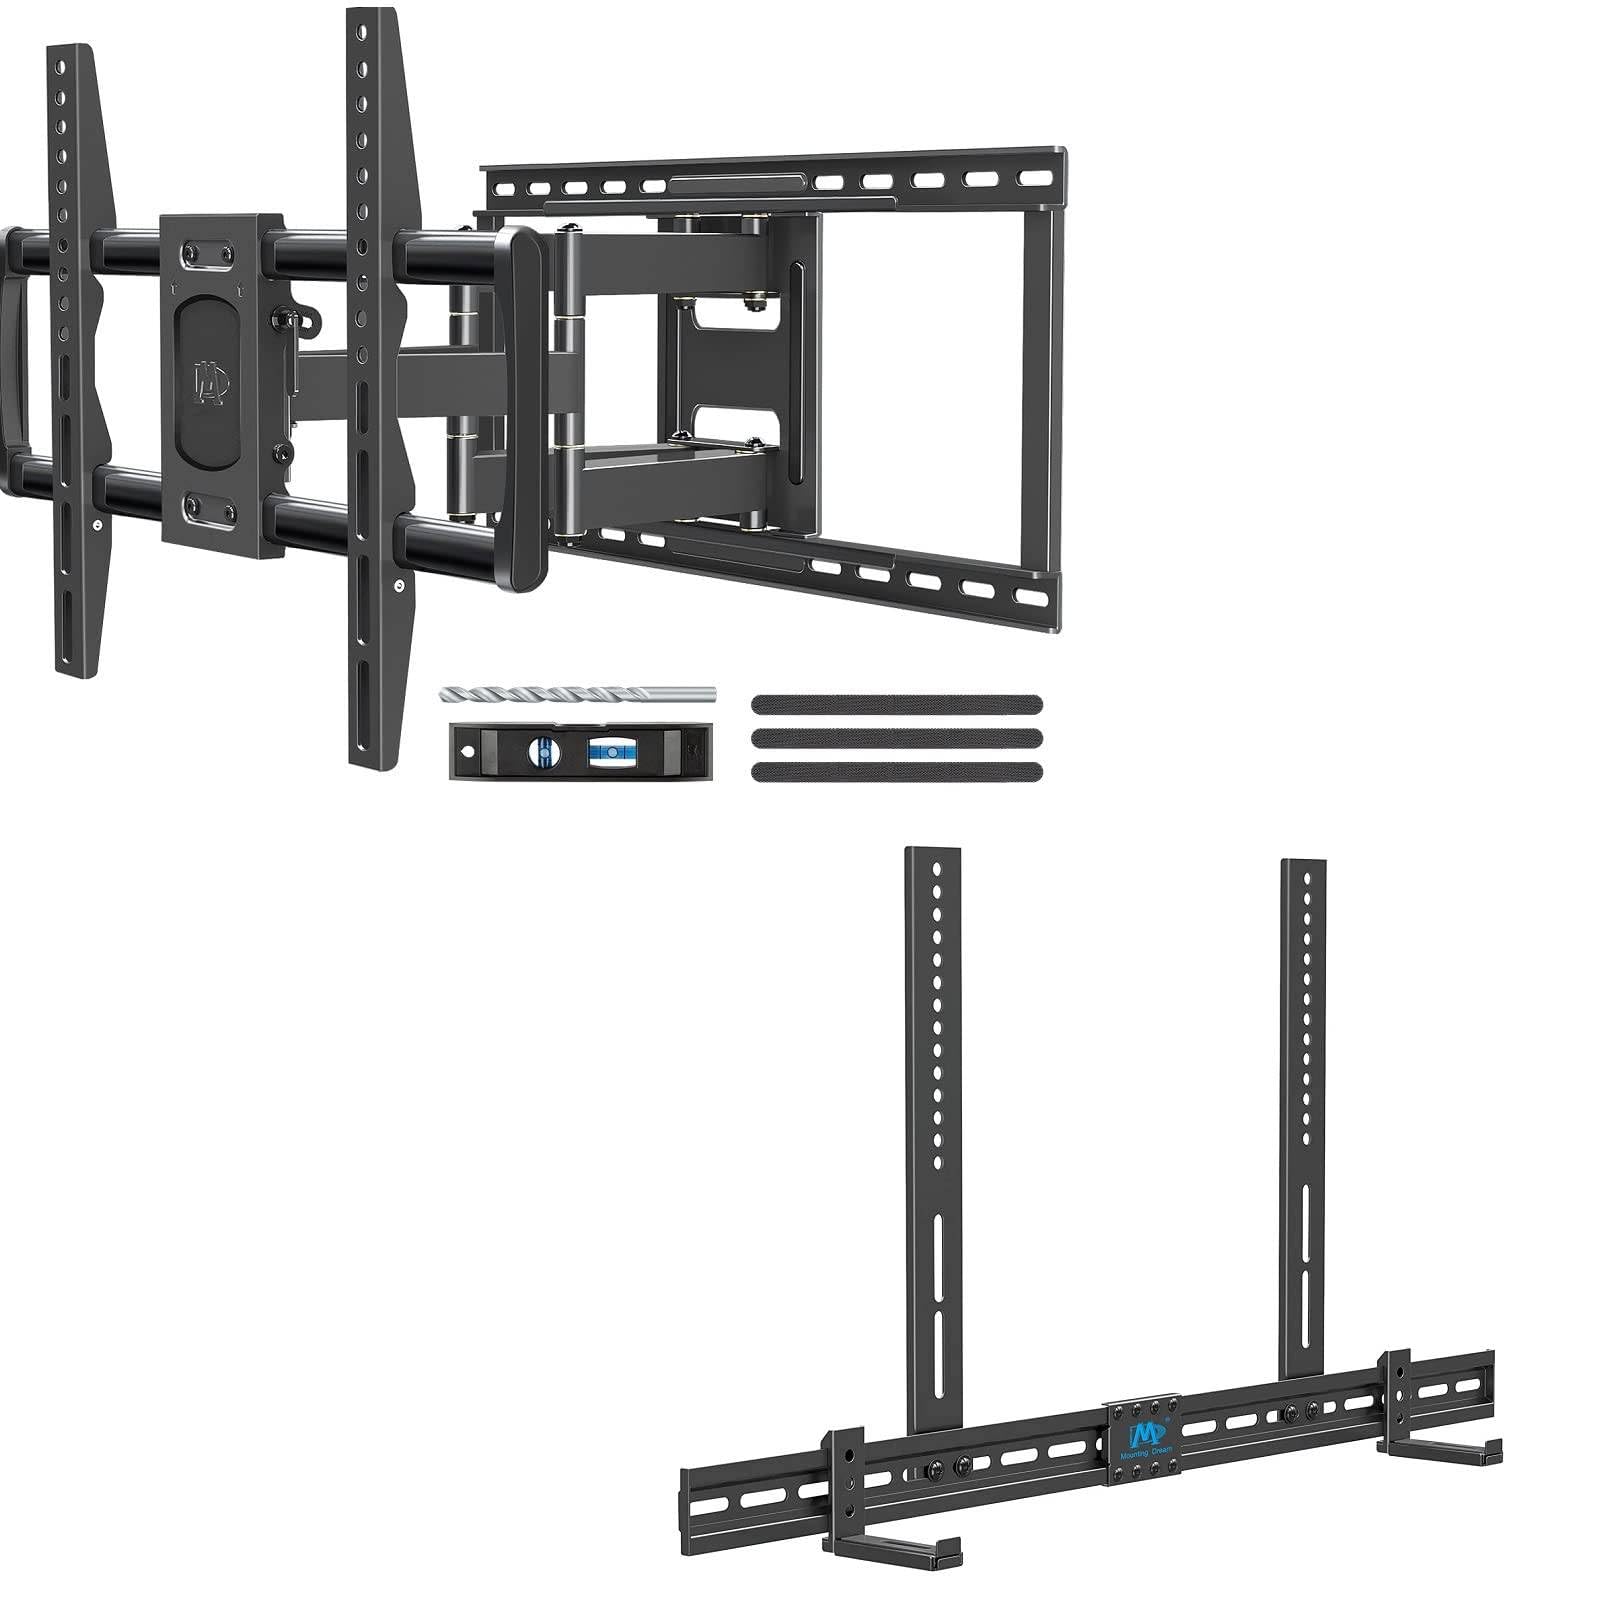 Mounting Dream Full Motion TV Mount Wall Bracket TV Wall Mounts for 42-75 Inch TV & Soundbar Mount Sound Bar TV Bracket for Mounting Above or Under TV Fits Most of Sound Bars Up to 13 Lbs